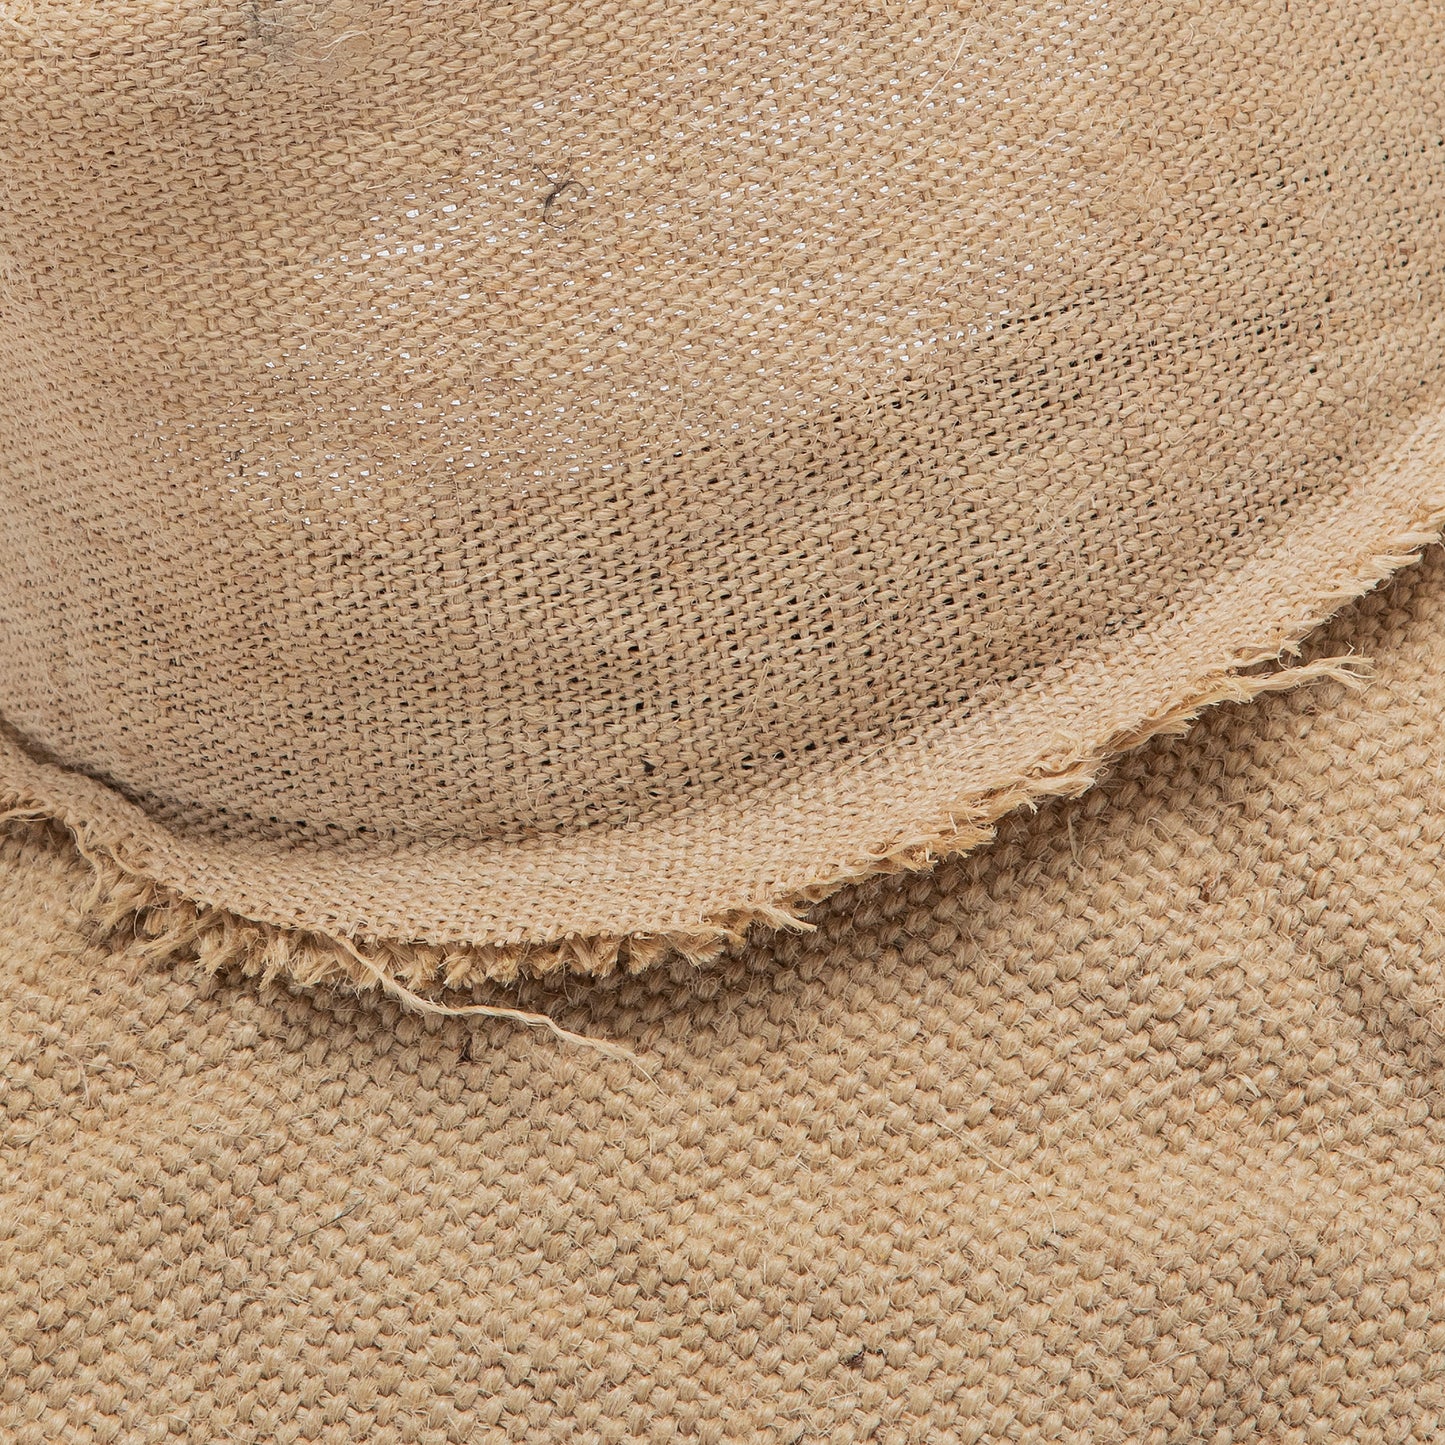 BEGHE S JUTE NATURAL